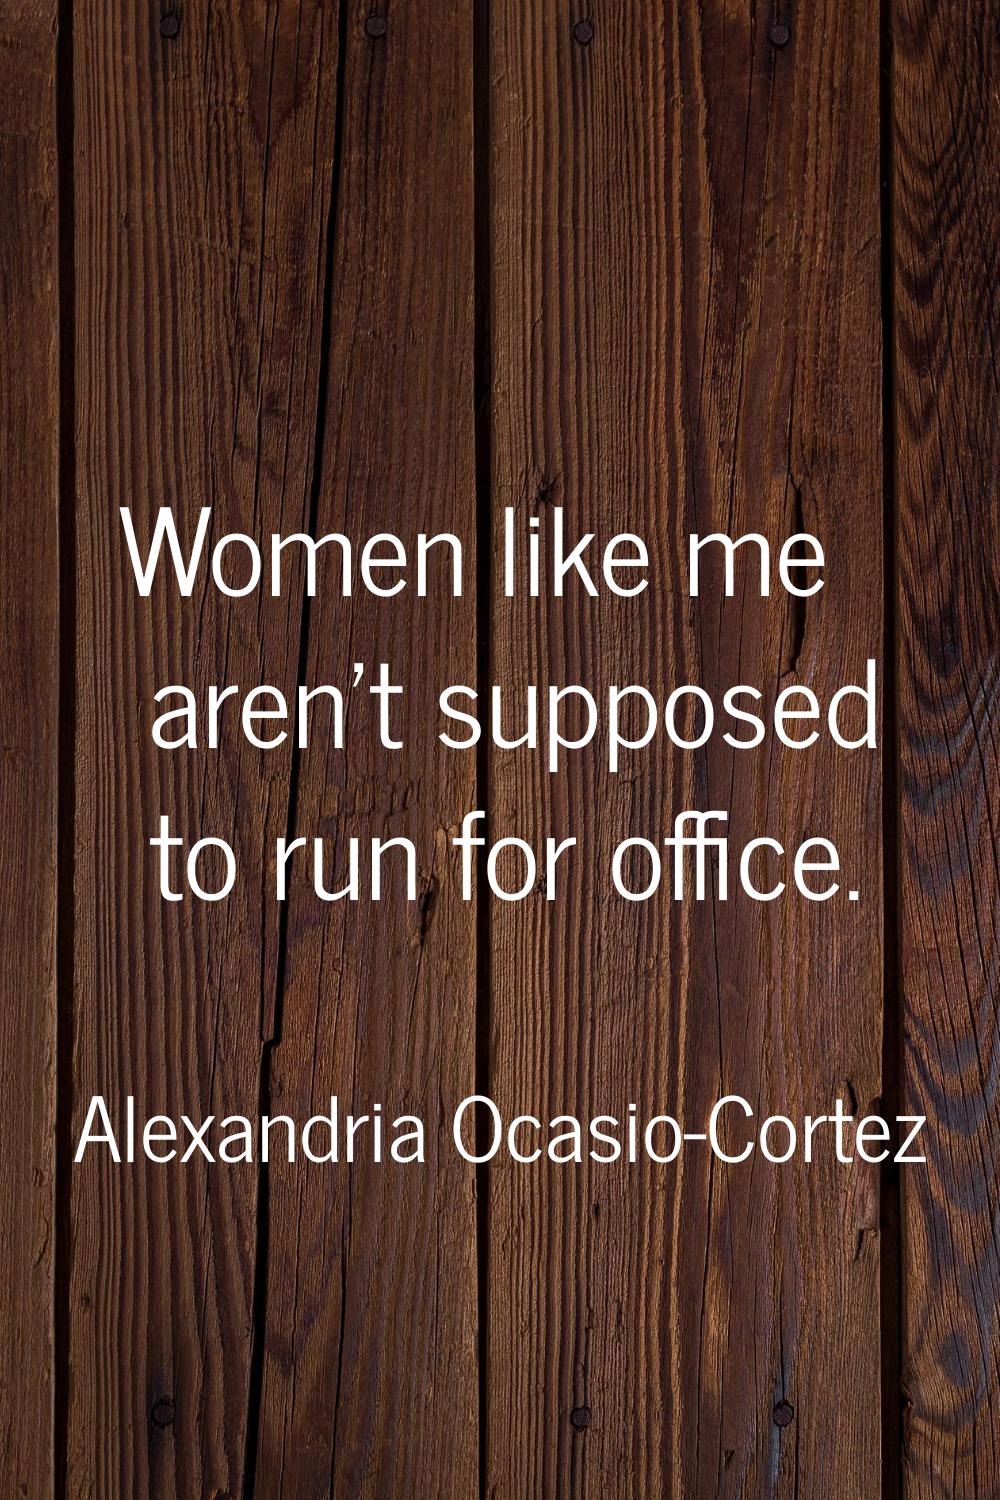 Women like me aren't supposed to run for office.